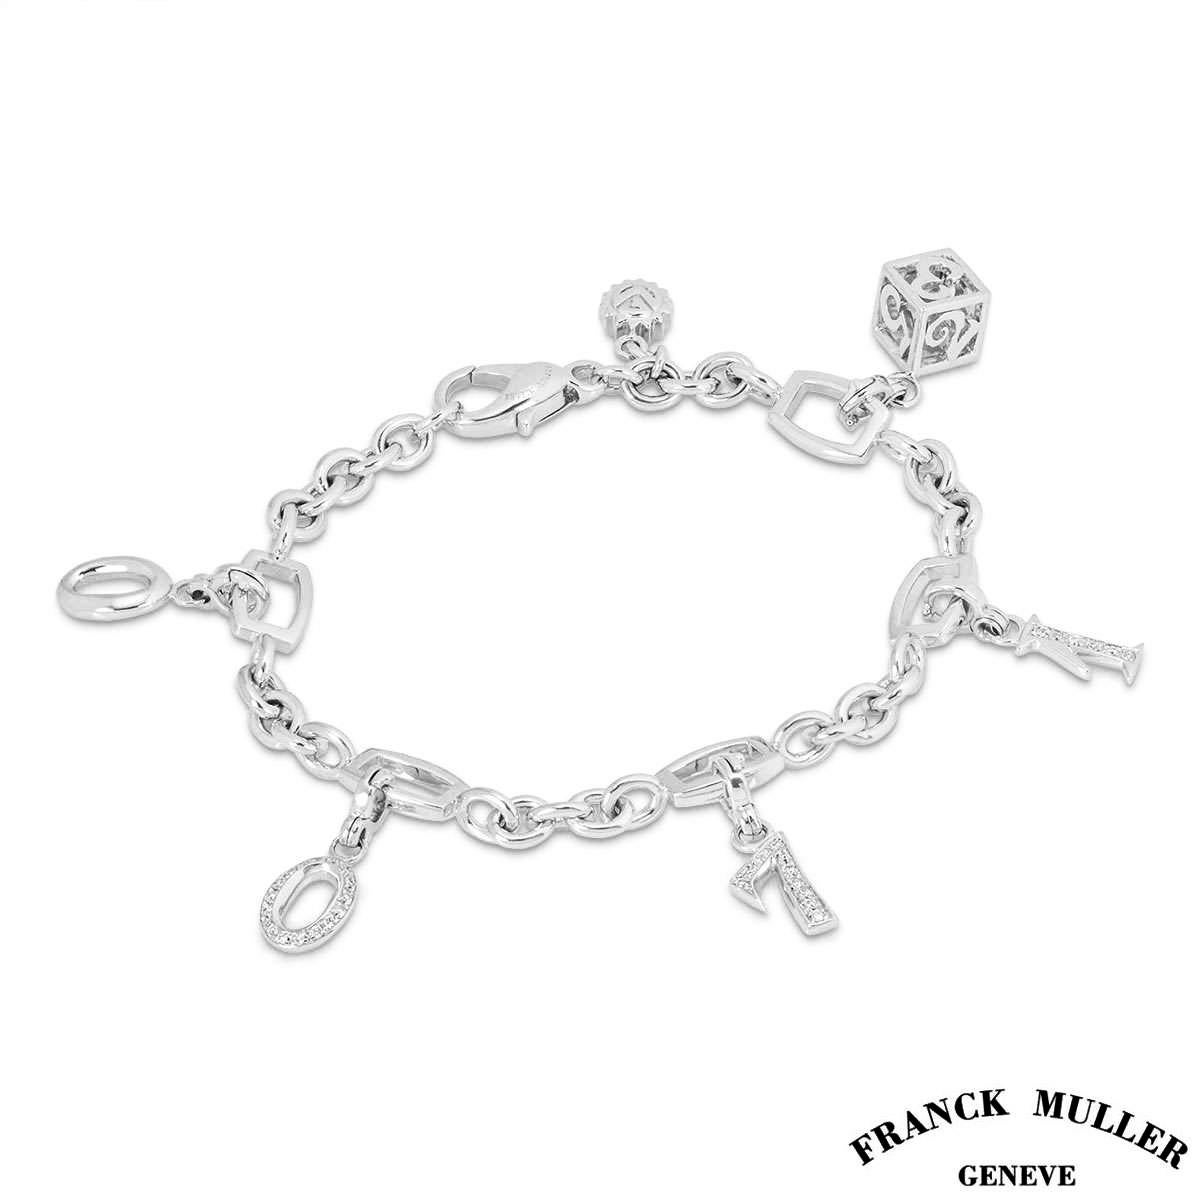 An 18k white gold charm bracelet from the Talisman collection by Franck Muller. The body of the bracelet is made up of a trace link chain, intermittently set through the centre with 5 rectangular open work intervals and a small iconic Franck Muller